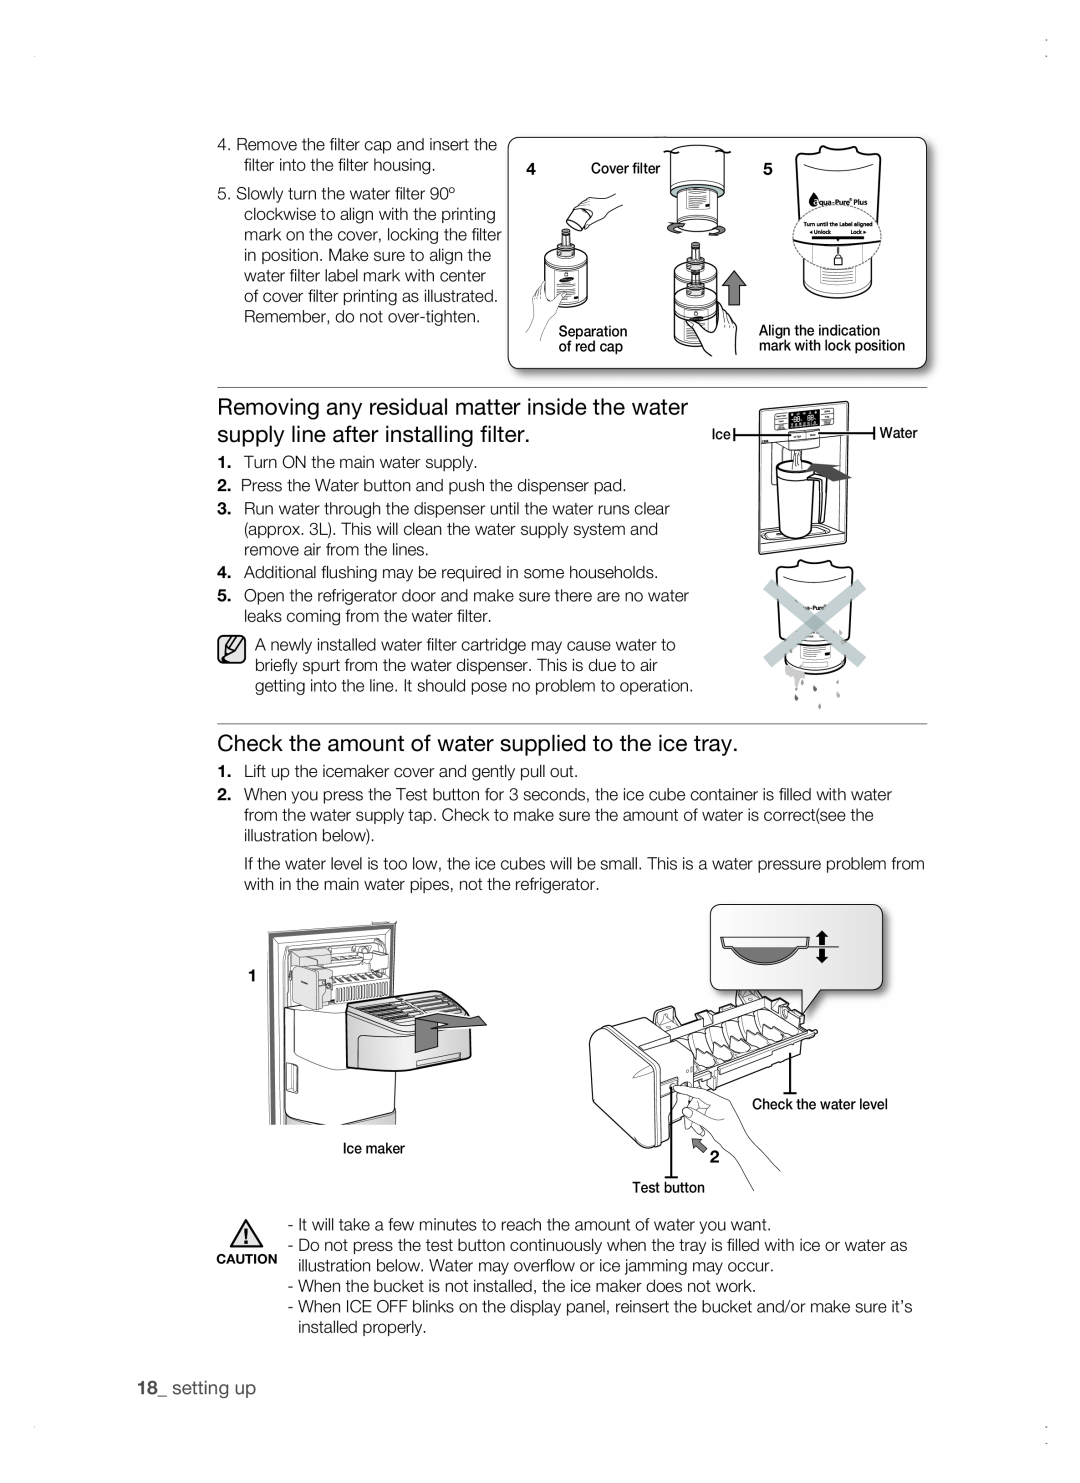 Samsung RSG5 user manual Removing any residual matter inside the water, supply line after installing filter, setting up 